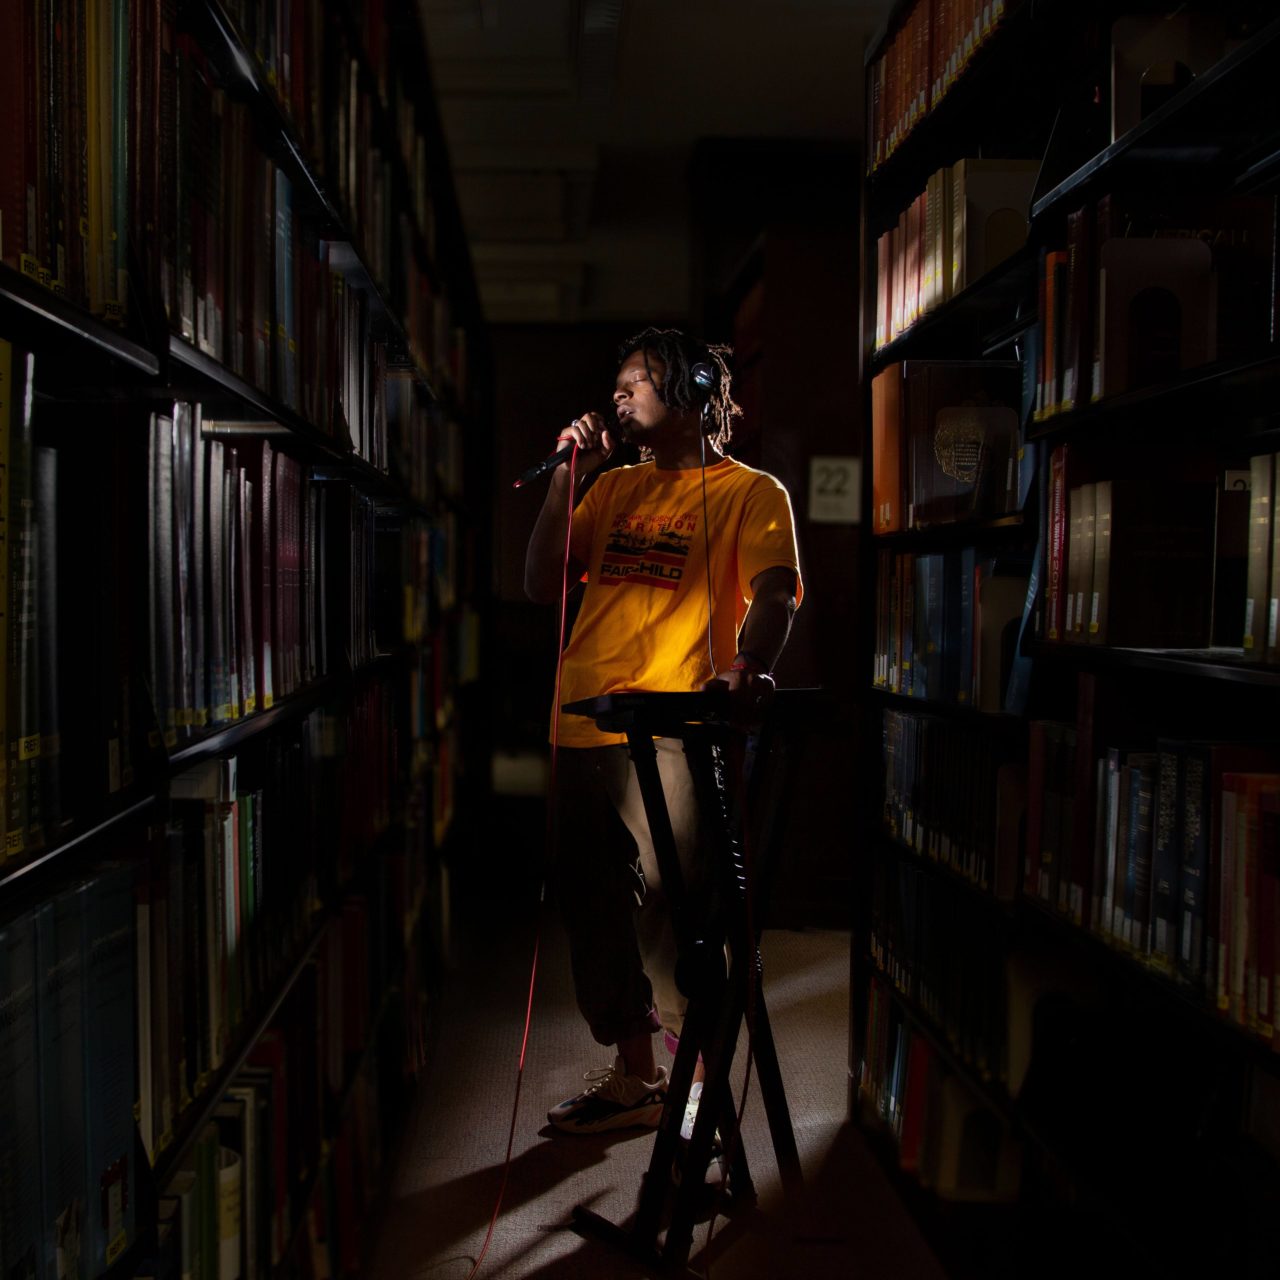 Student Marcus Harley performing into a mic behind equipment while standing in between library book stacks.